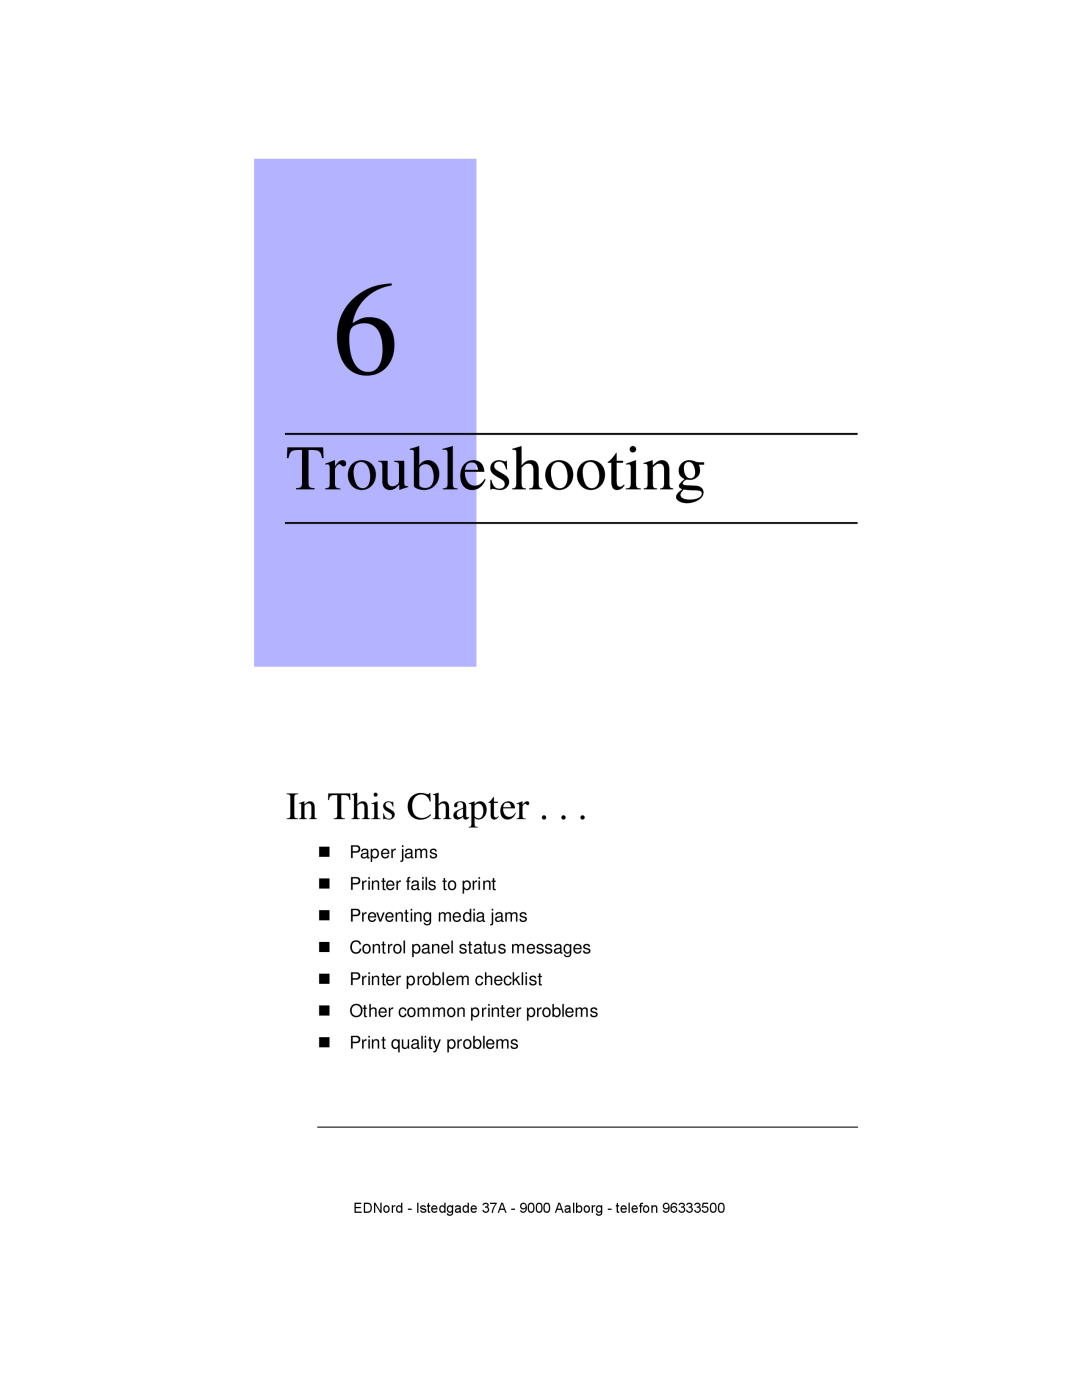 IBM QMS 4525 manual Troubleshooting, In This Chapter, „ Paper jams „ Printer fails to print „ Preventing media jams 